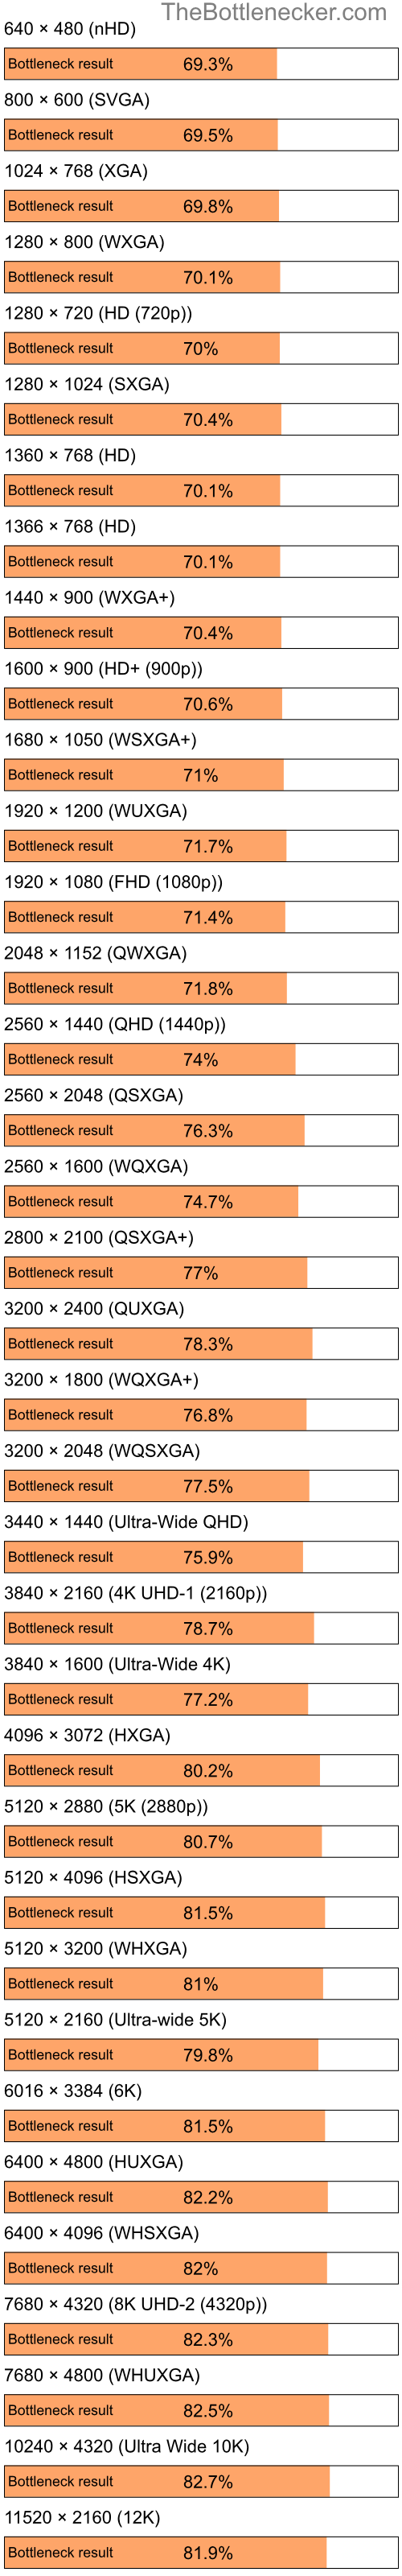 Bottleneck results by resolution for Intel Pentium 4 and Intel G45 in Graphic Card Intense Tasks